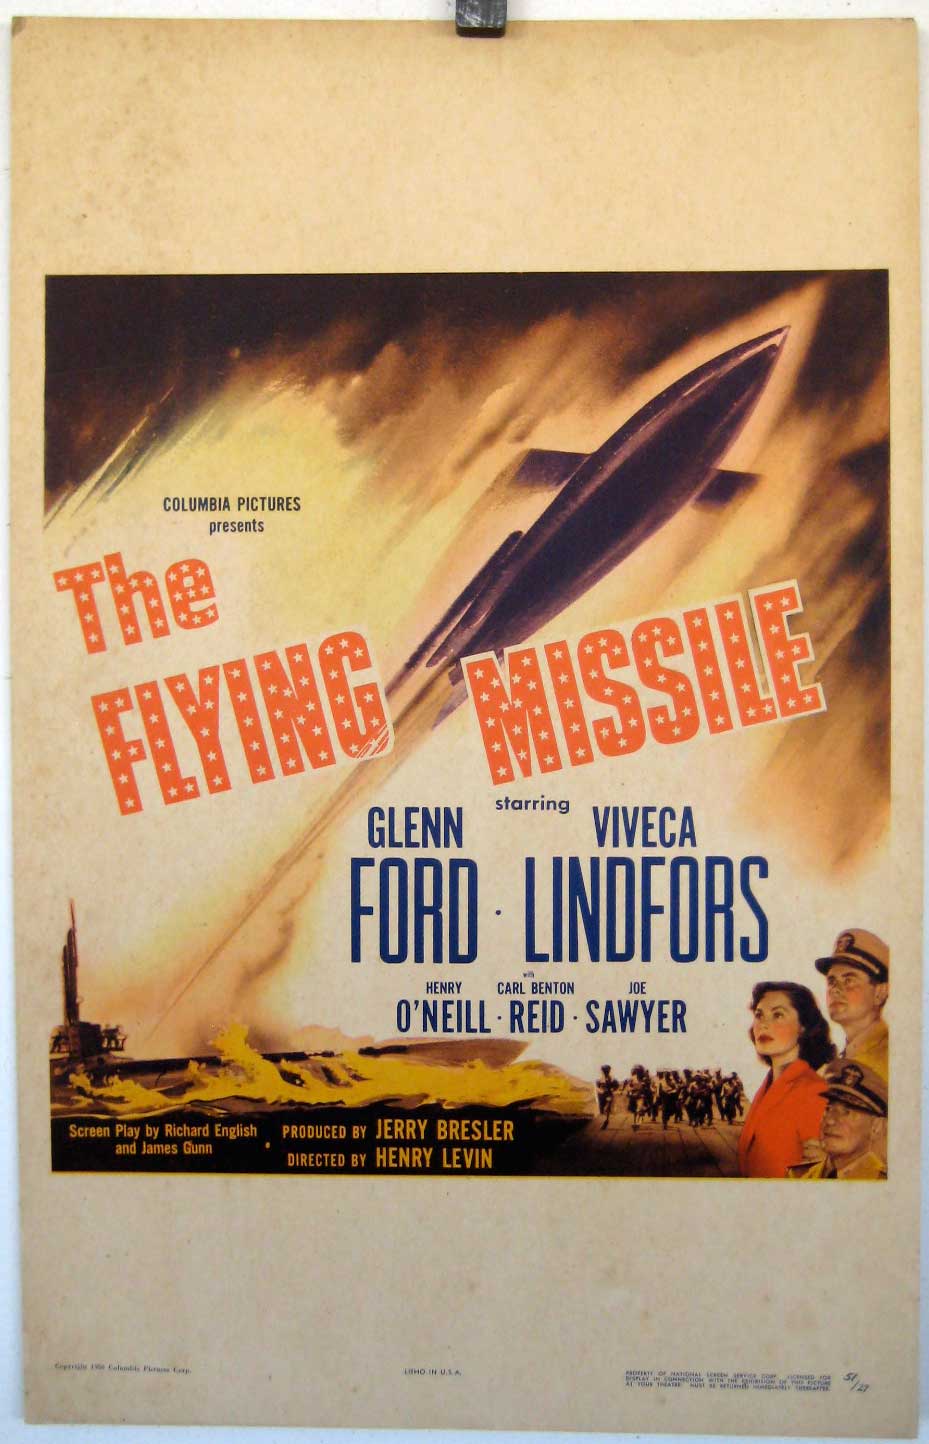 FLYING MISSILE, THE